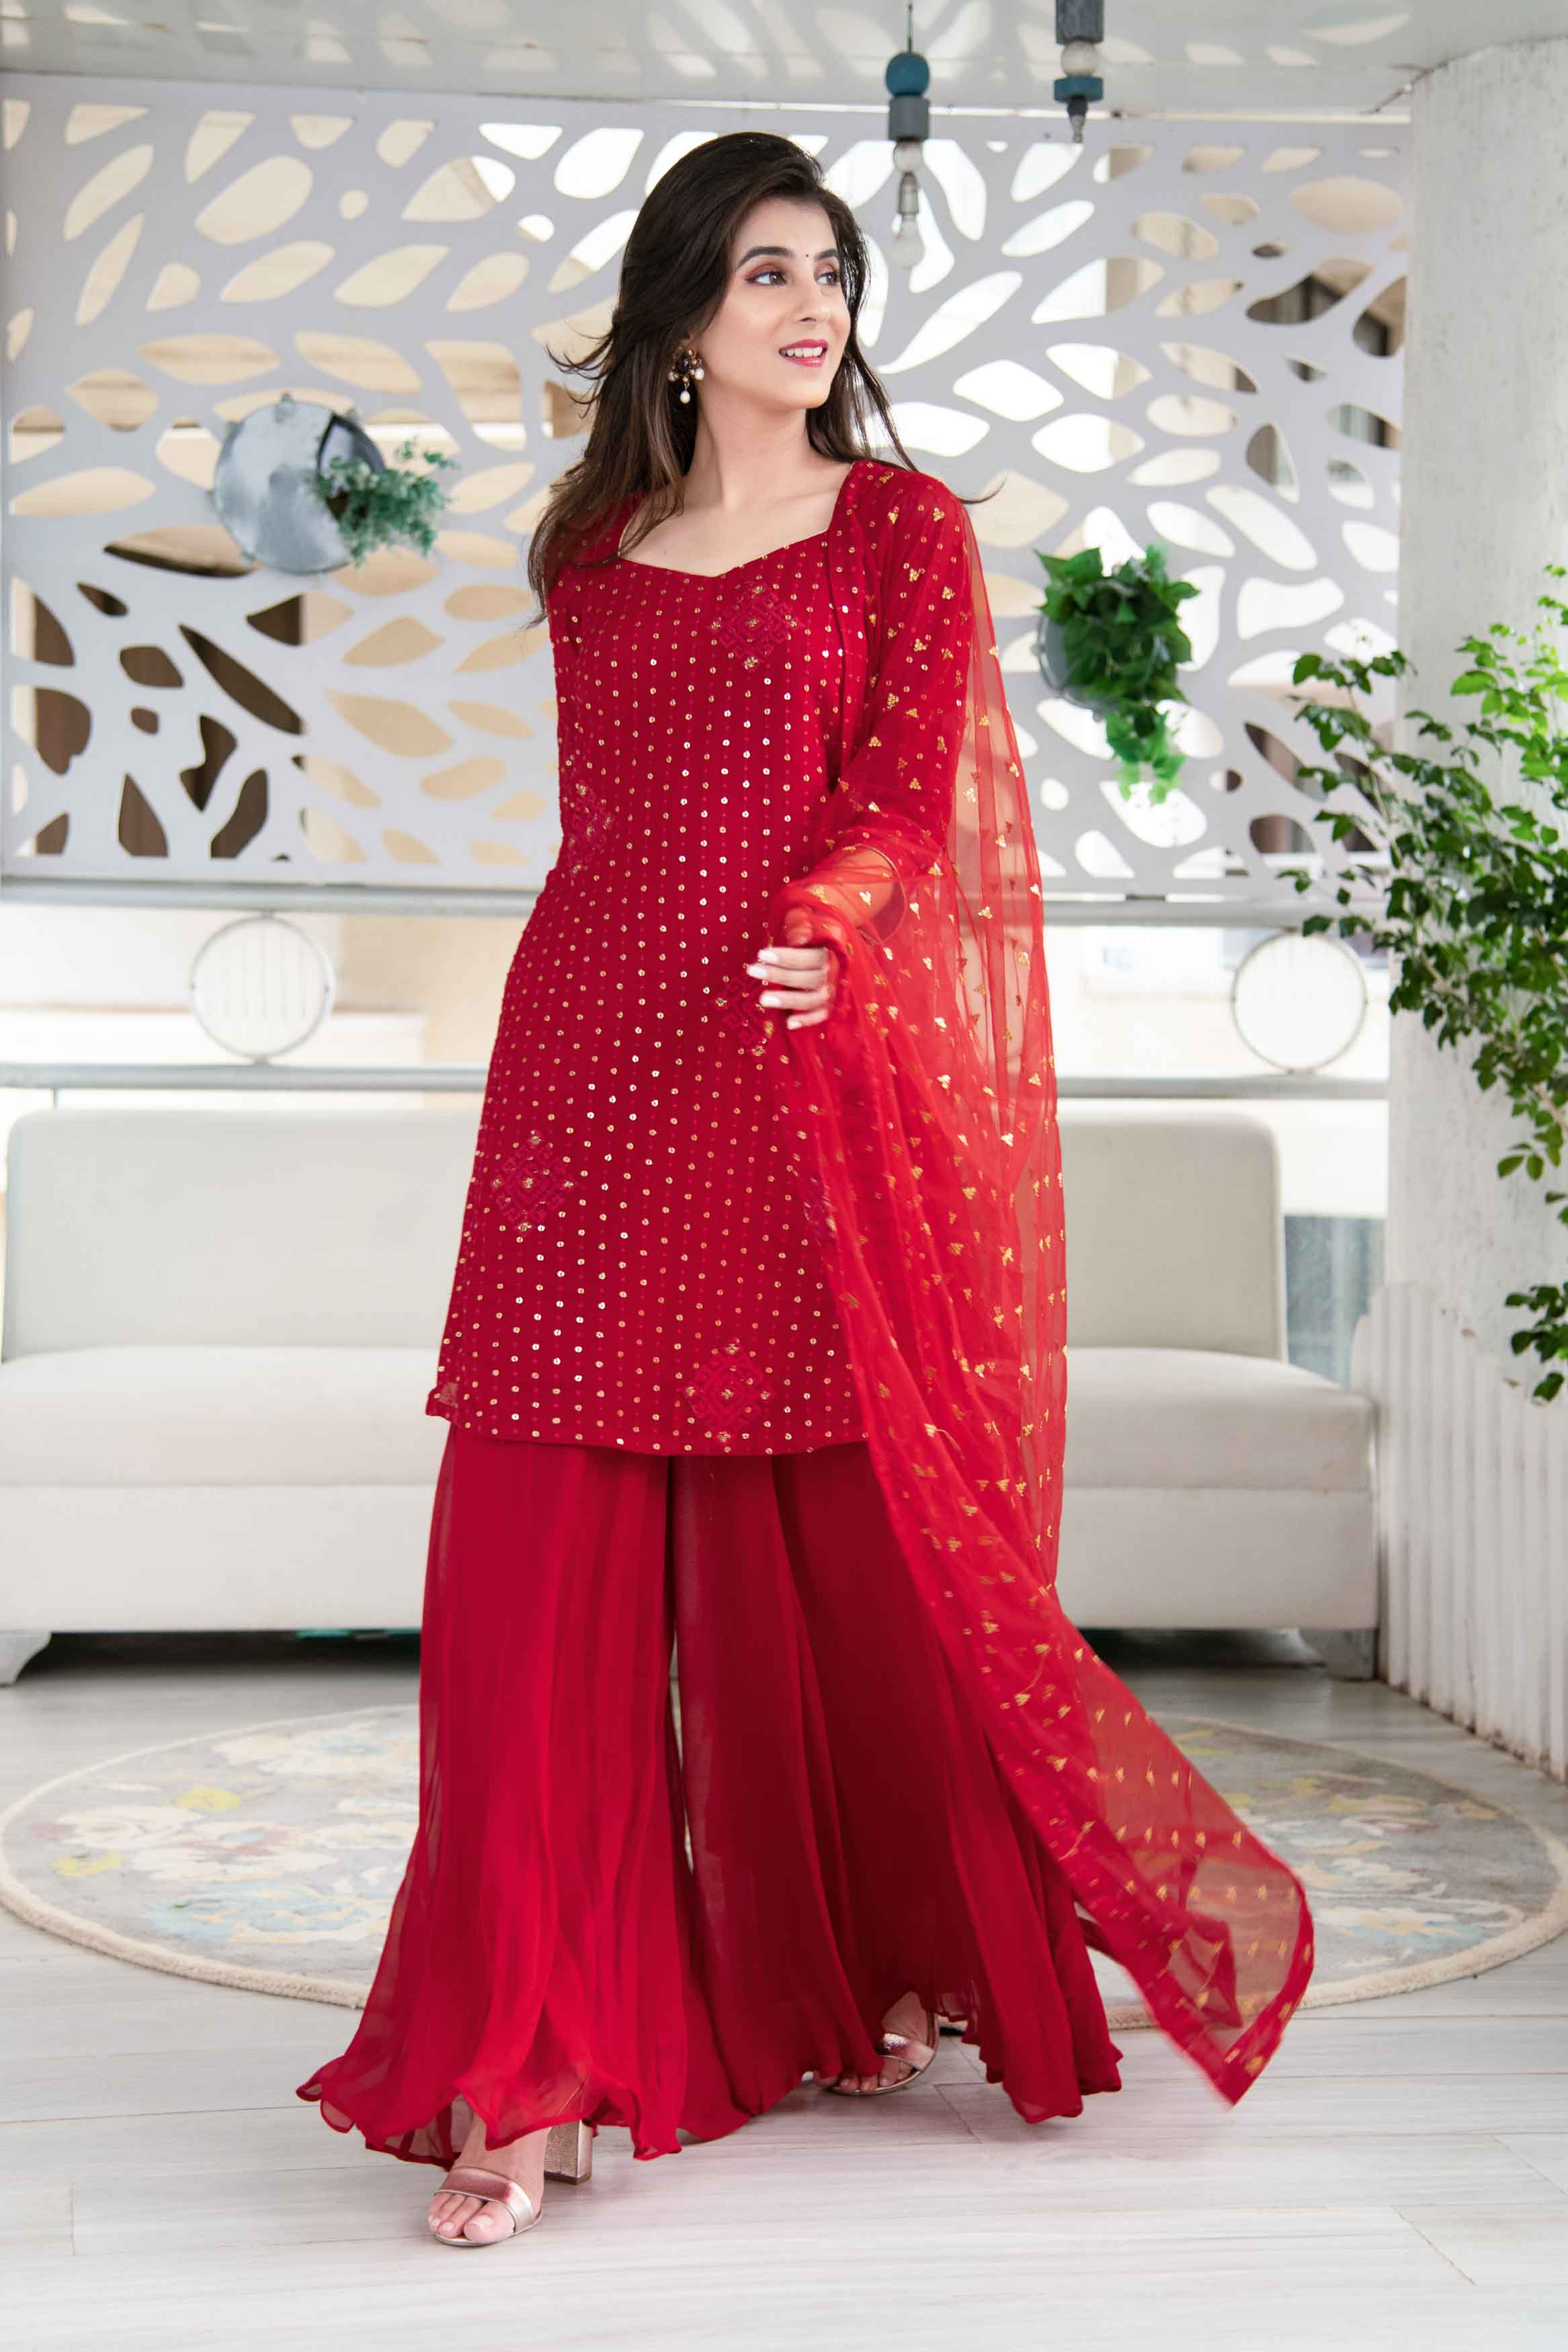 Red Palazzos - Buy Trendy Red Palazzos Online in India